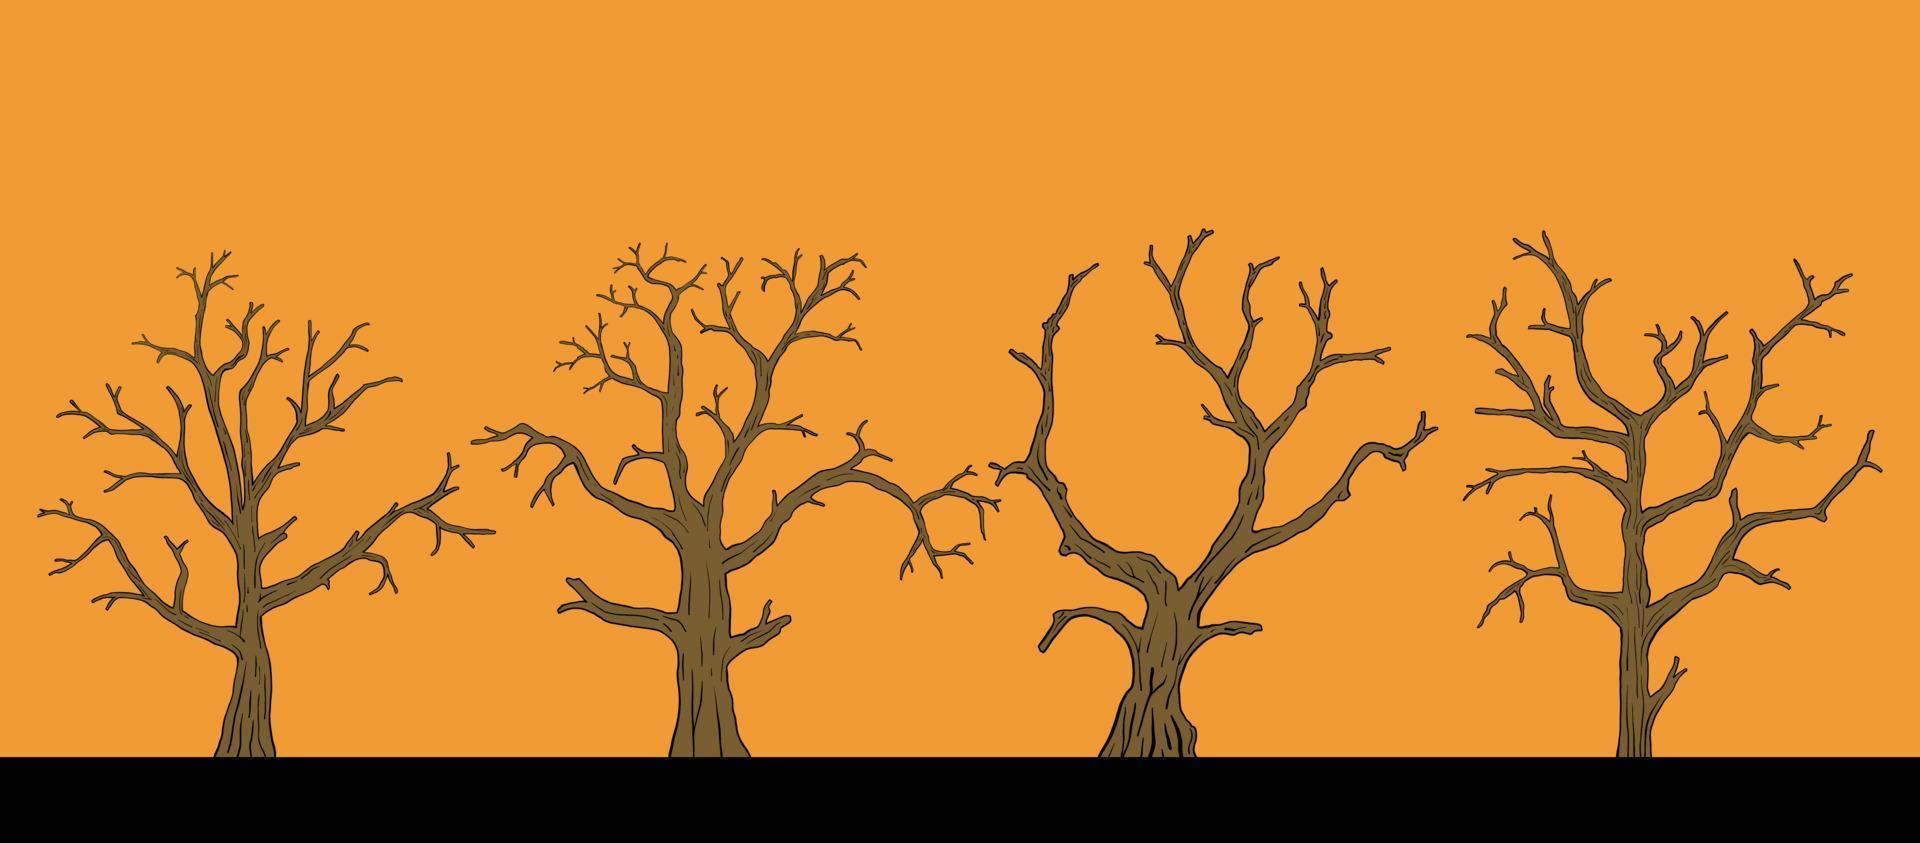 Simplicity collection of halloween dead tree freehand drawing flat design.V vector